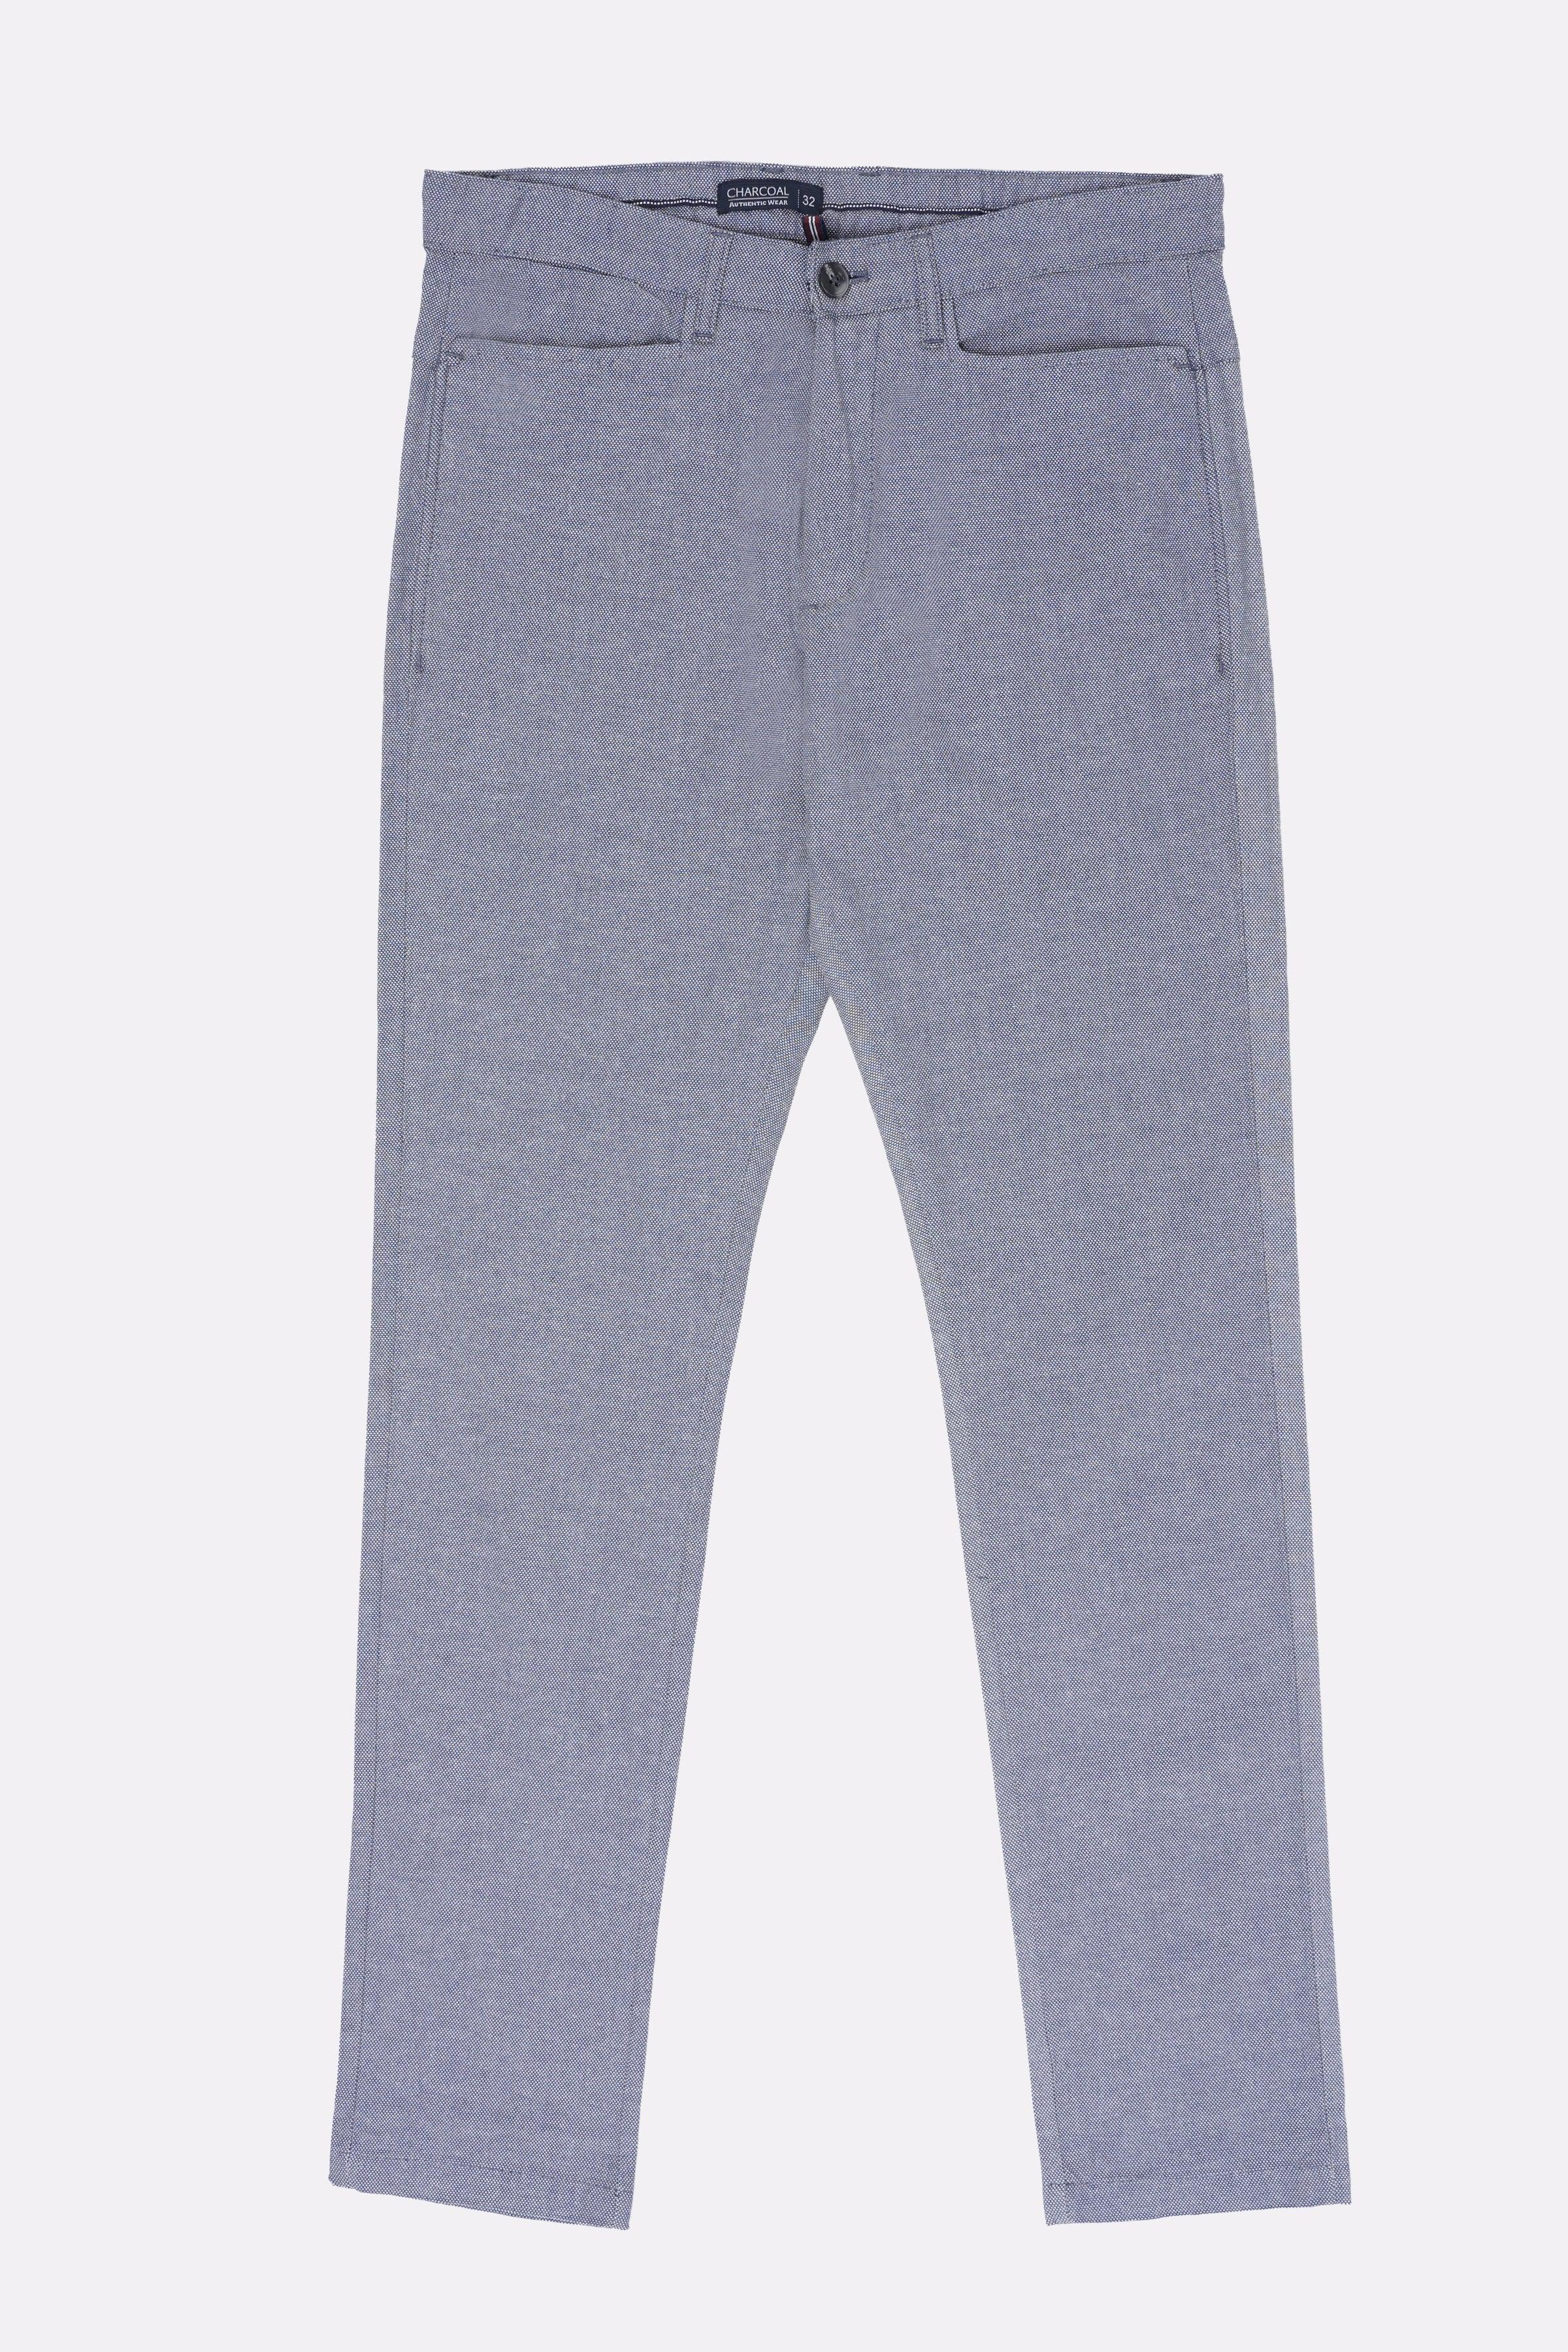 CASUAL PANT WHITE NAVY at Charcoal Clothing